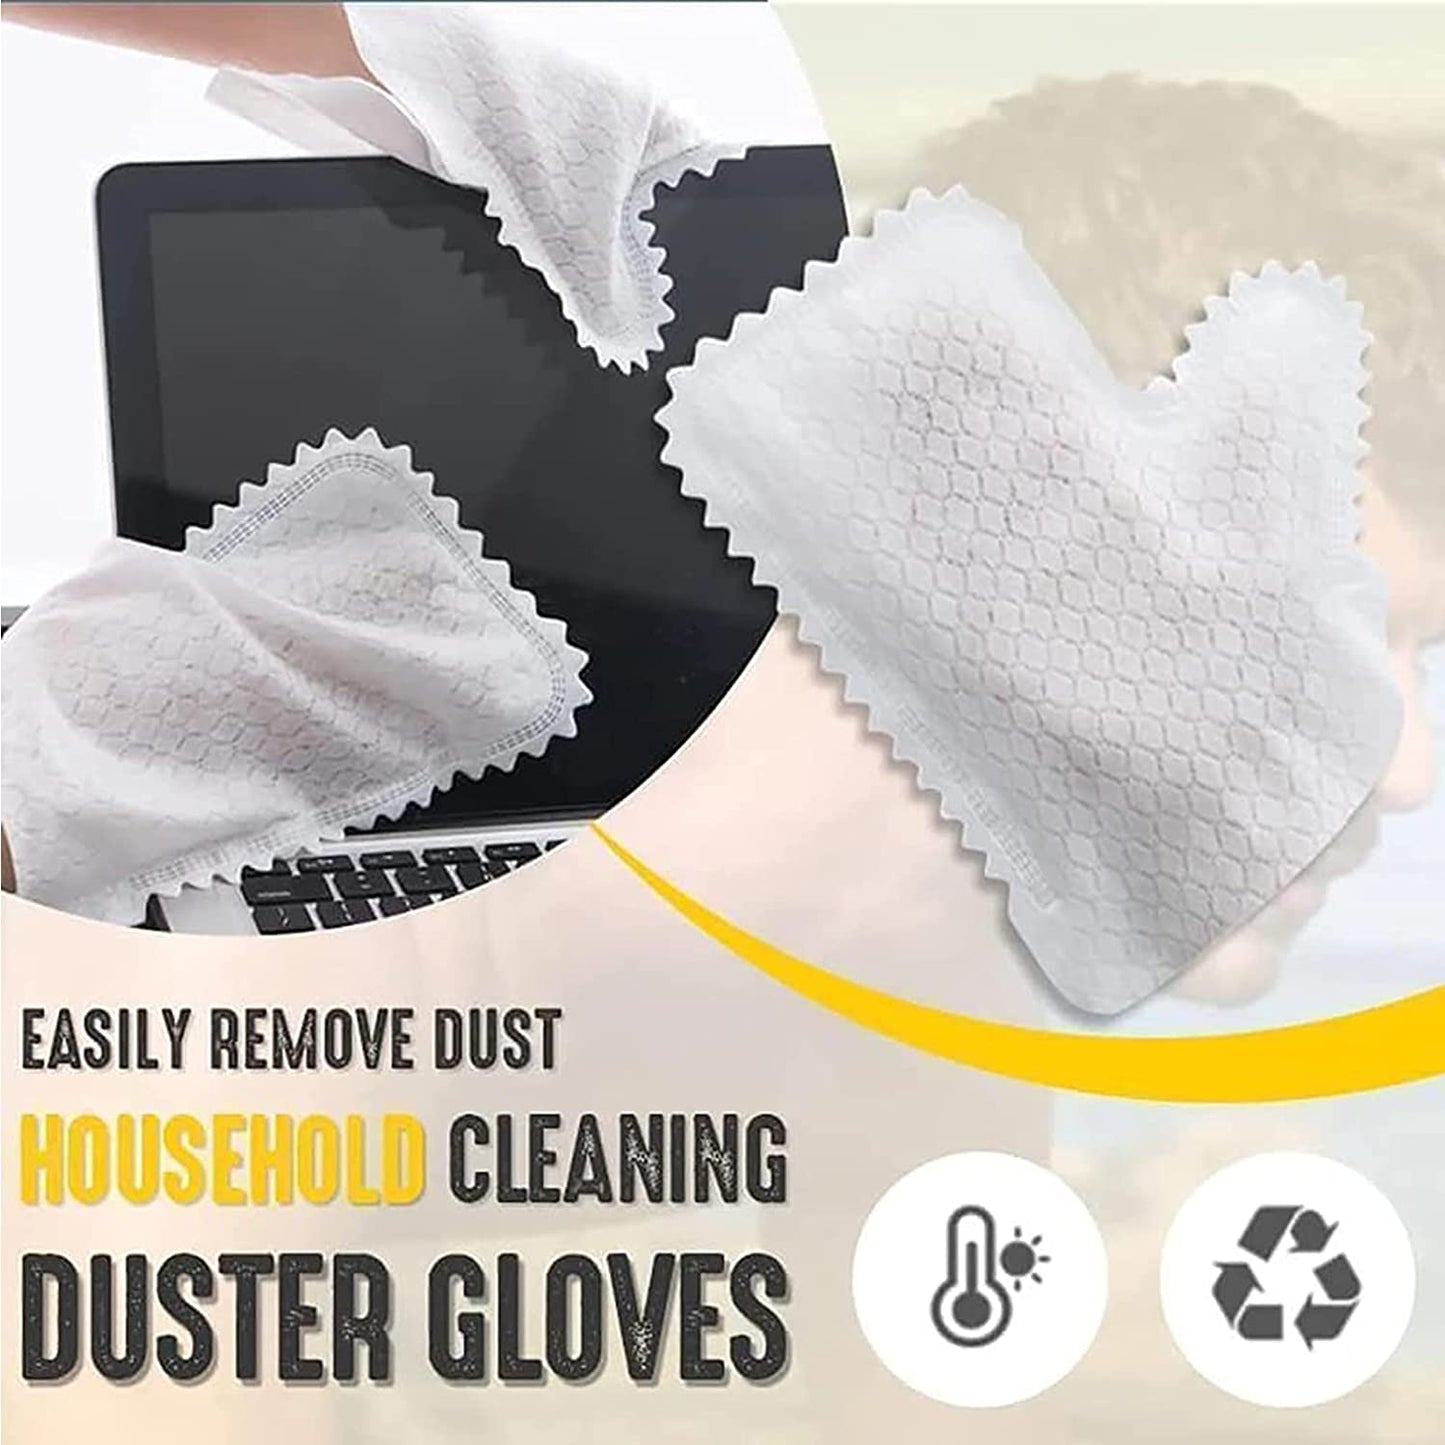 30pcs Dusting Mitts Disposable, Microfiber Auto Dusting Cleaning Gloves, Disposable Non-Woven Dust Removal Gloves, for Grab and Lock in Dust Pet Hair and Allergens